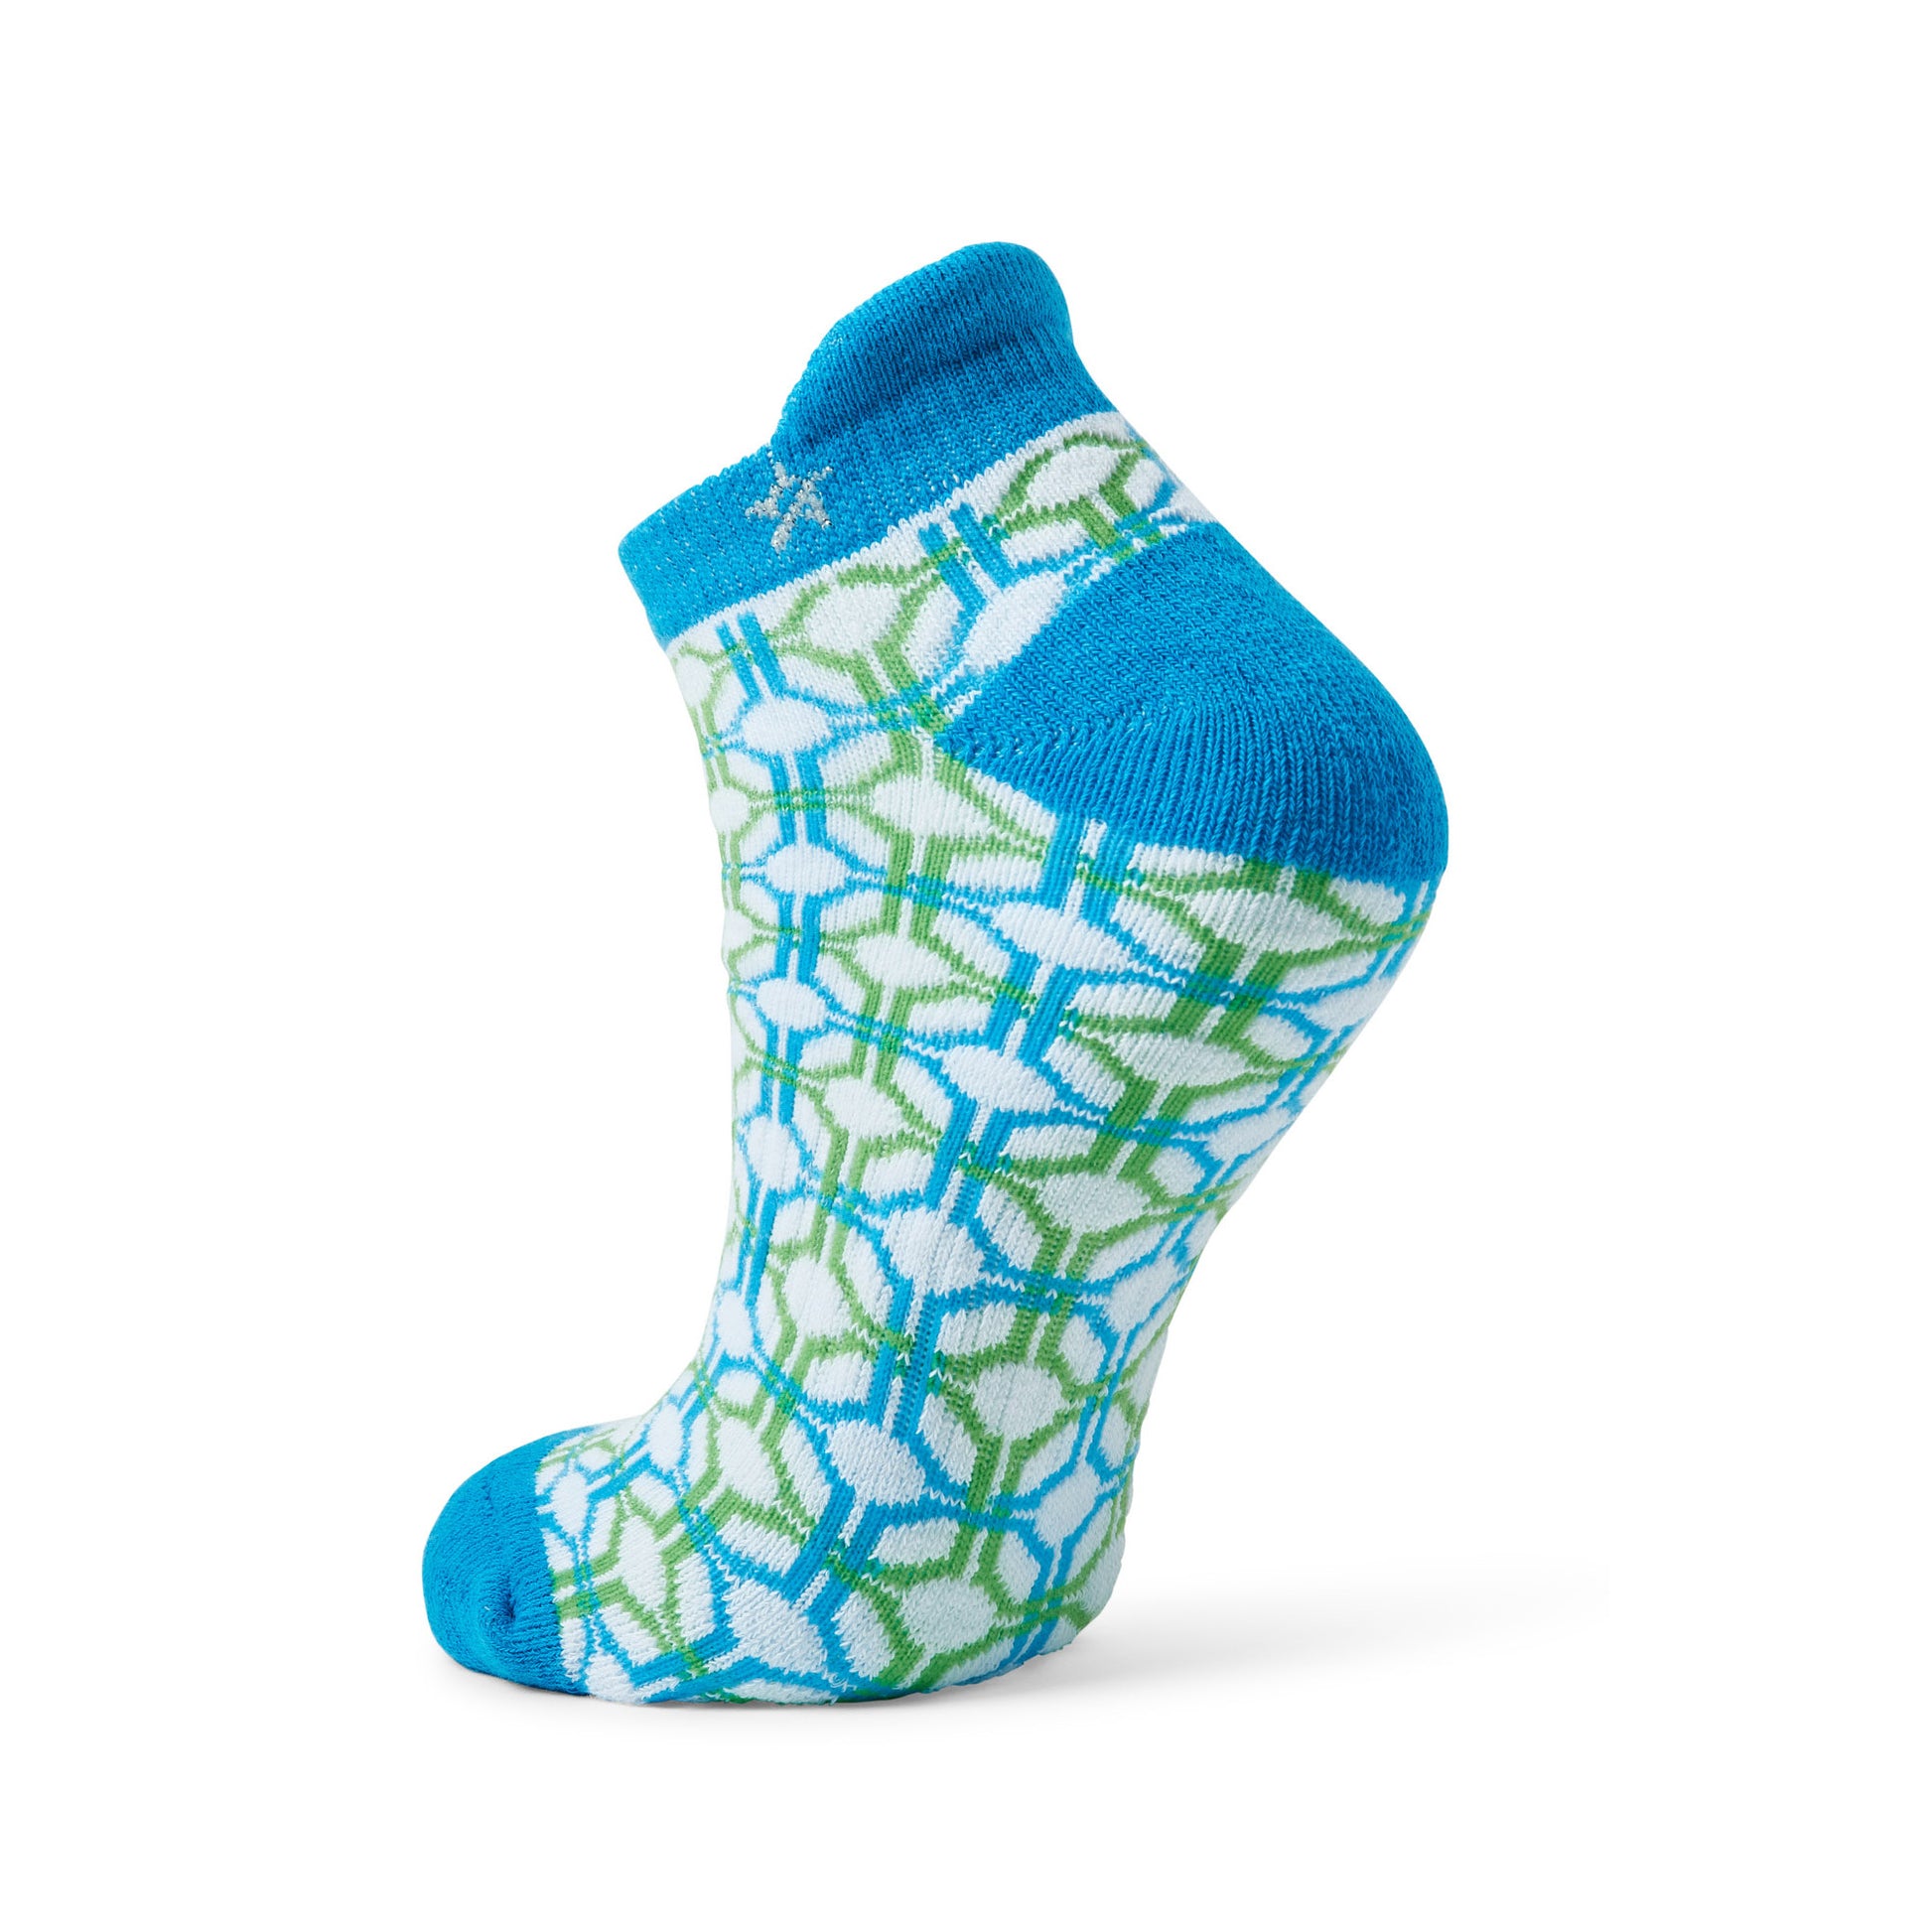 Swing Out Sister Ladies 2 Pair Cotton Socks in Dazzling Blue and Emerald